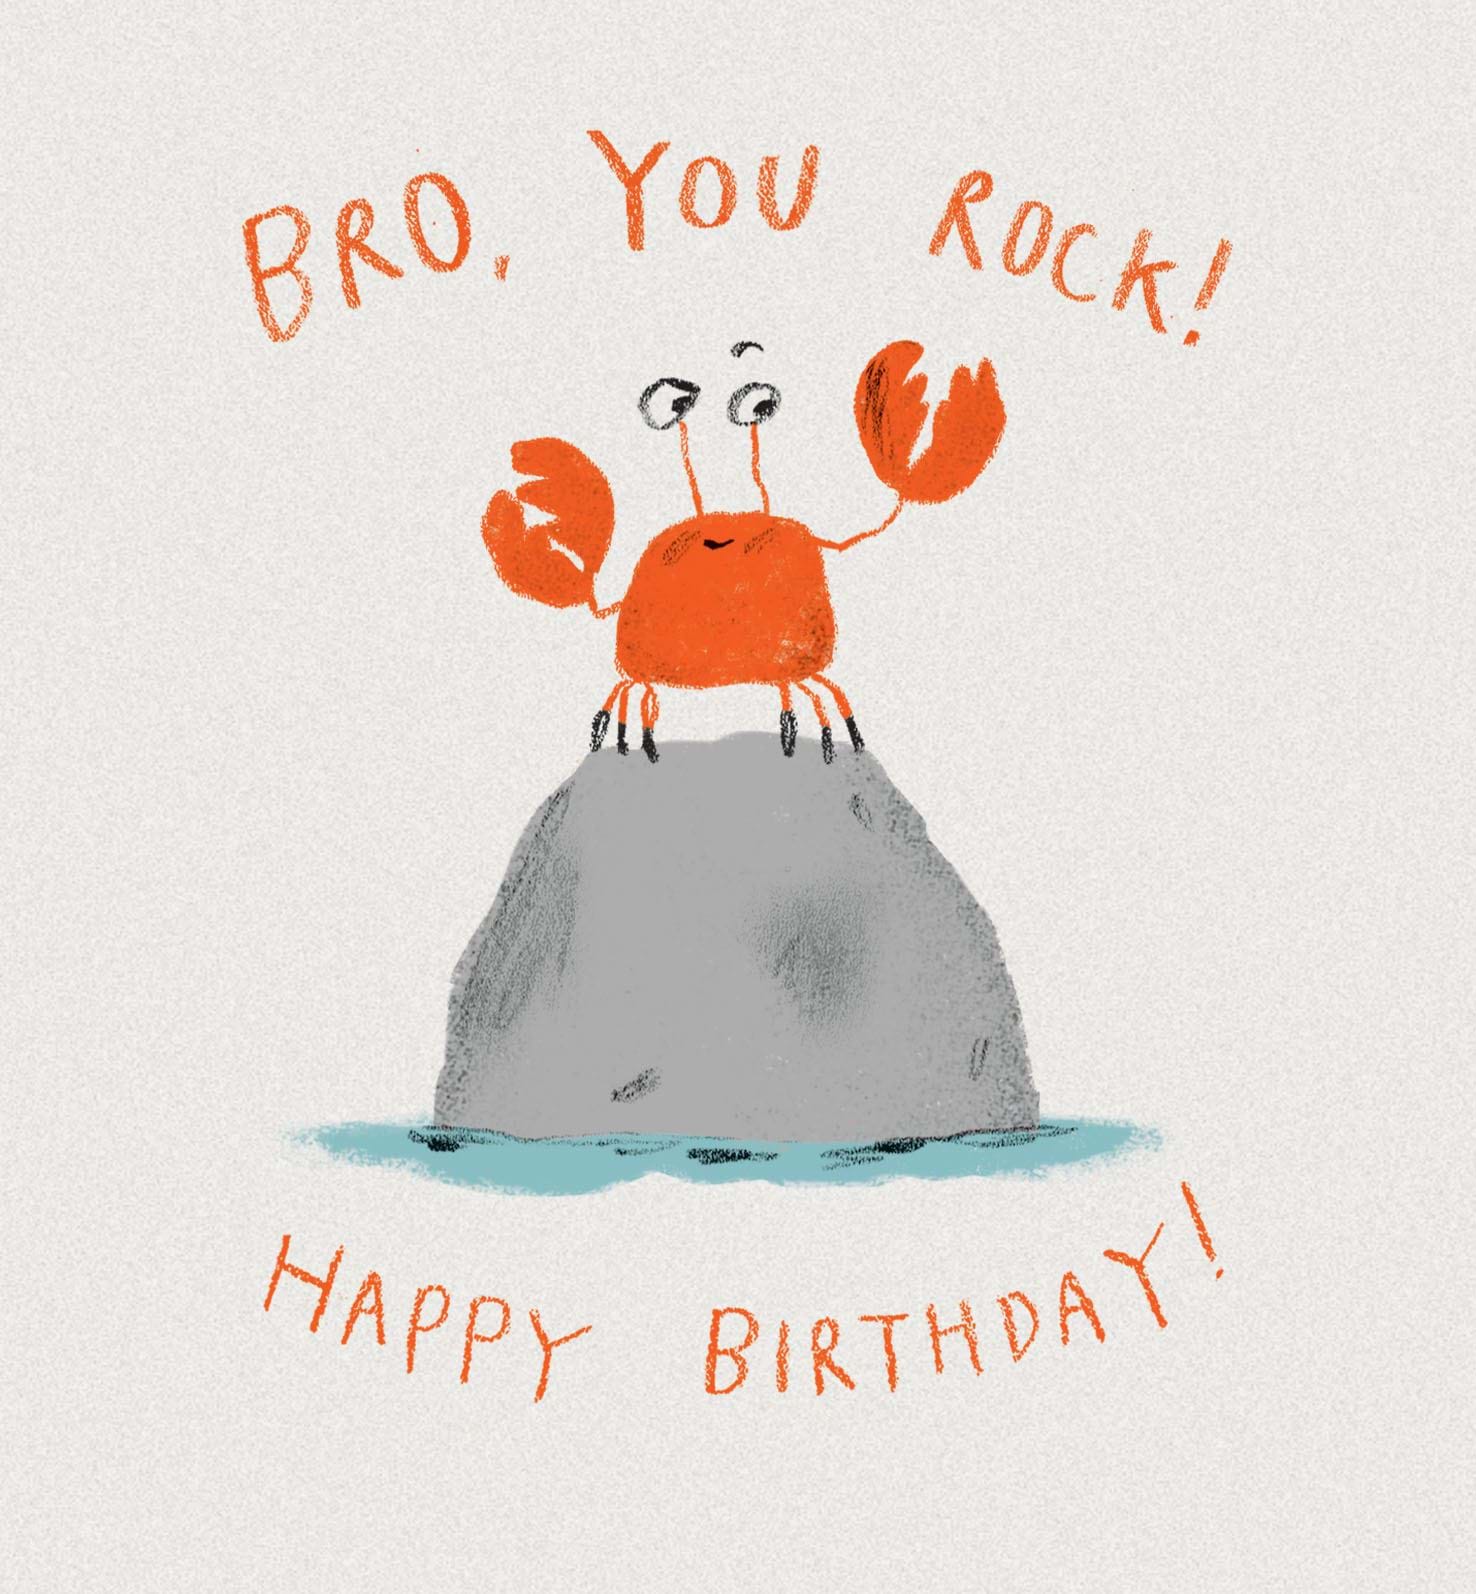 You Rock Brother Birthday Card